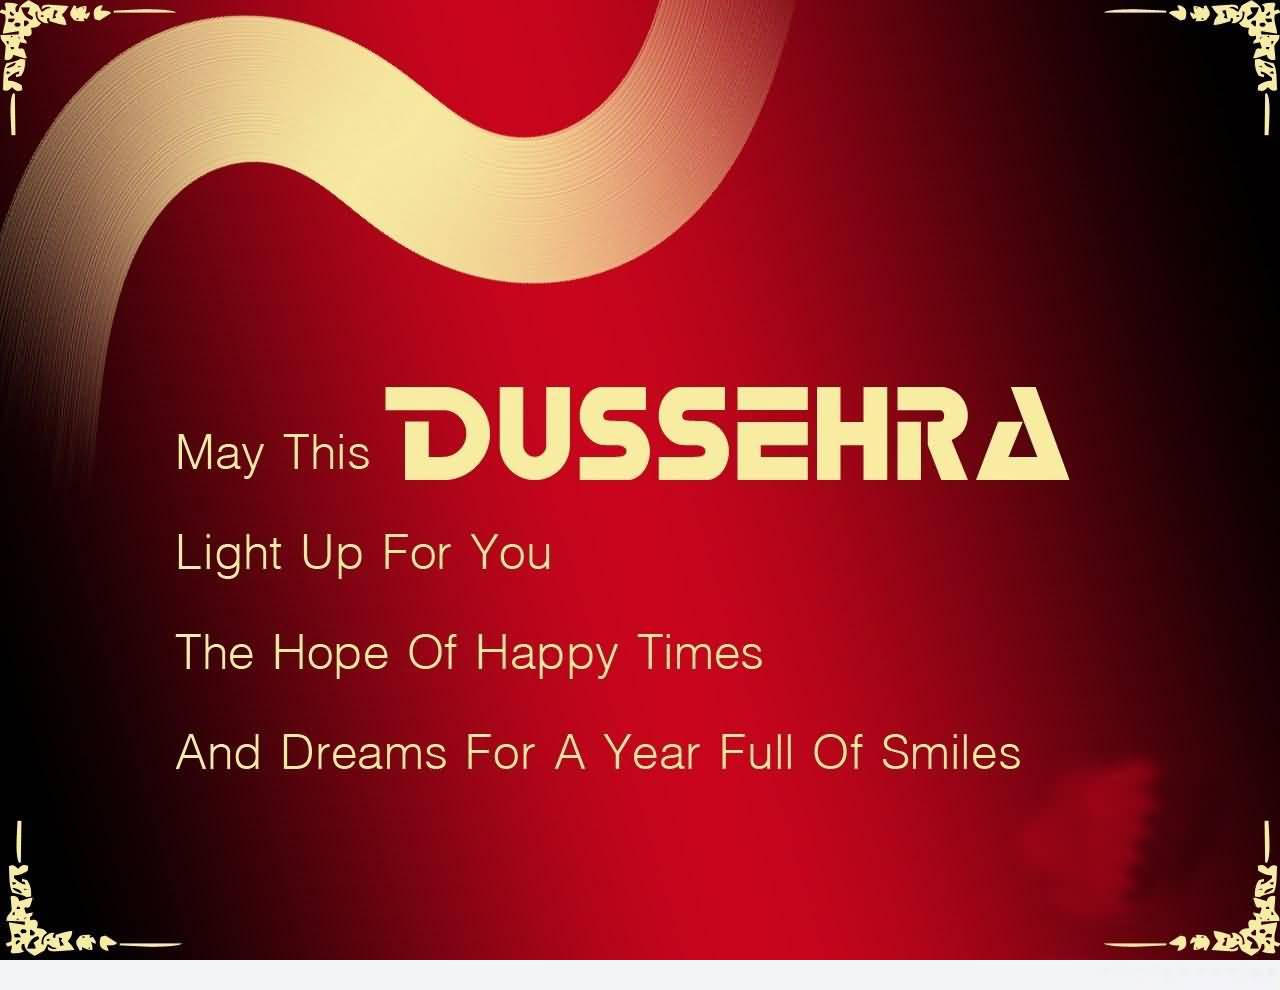 May This Dussehra Light Up For You The Hope Of Happy Times And Dreams For A Year Full Of Smiles